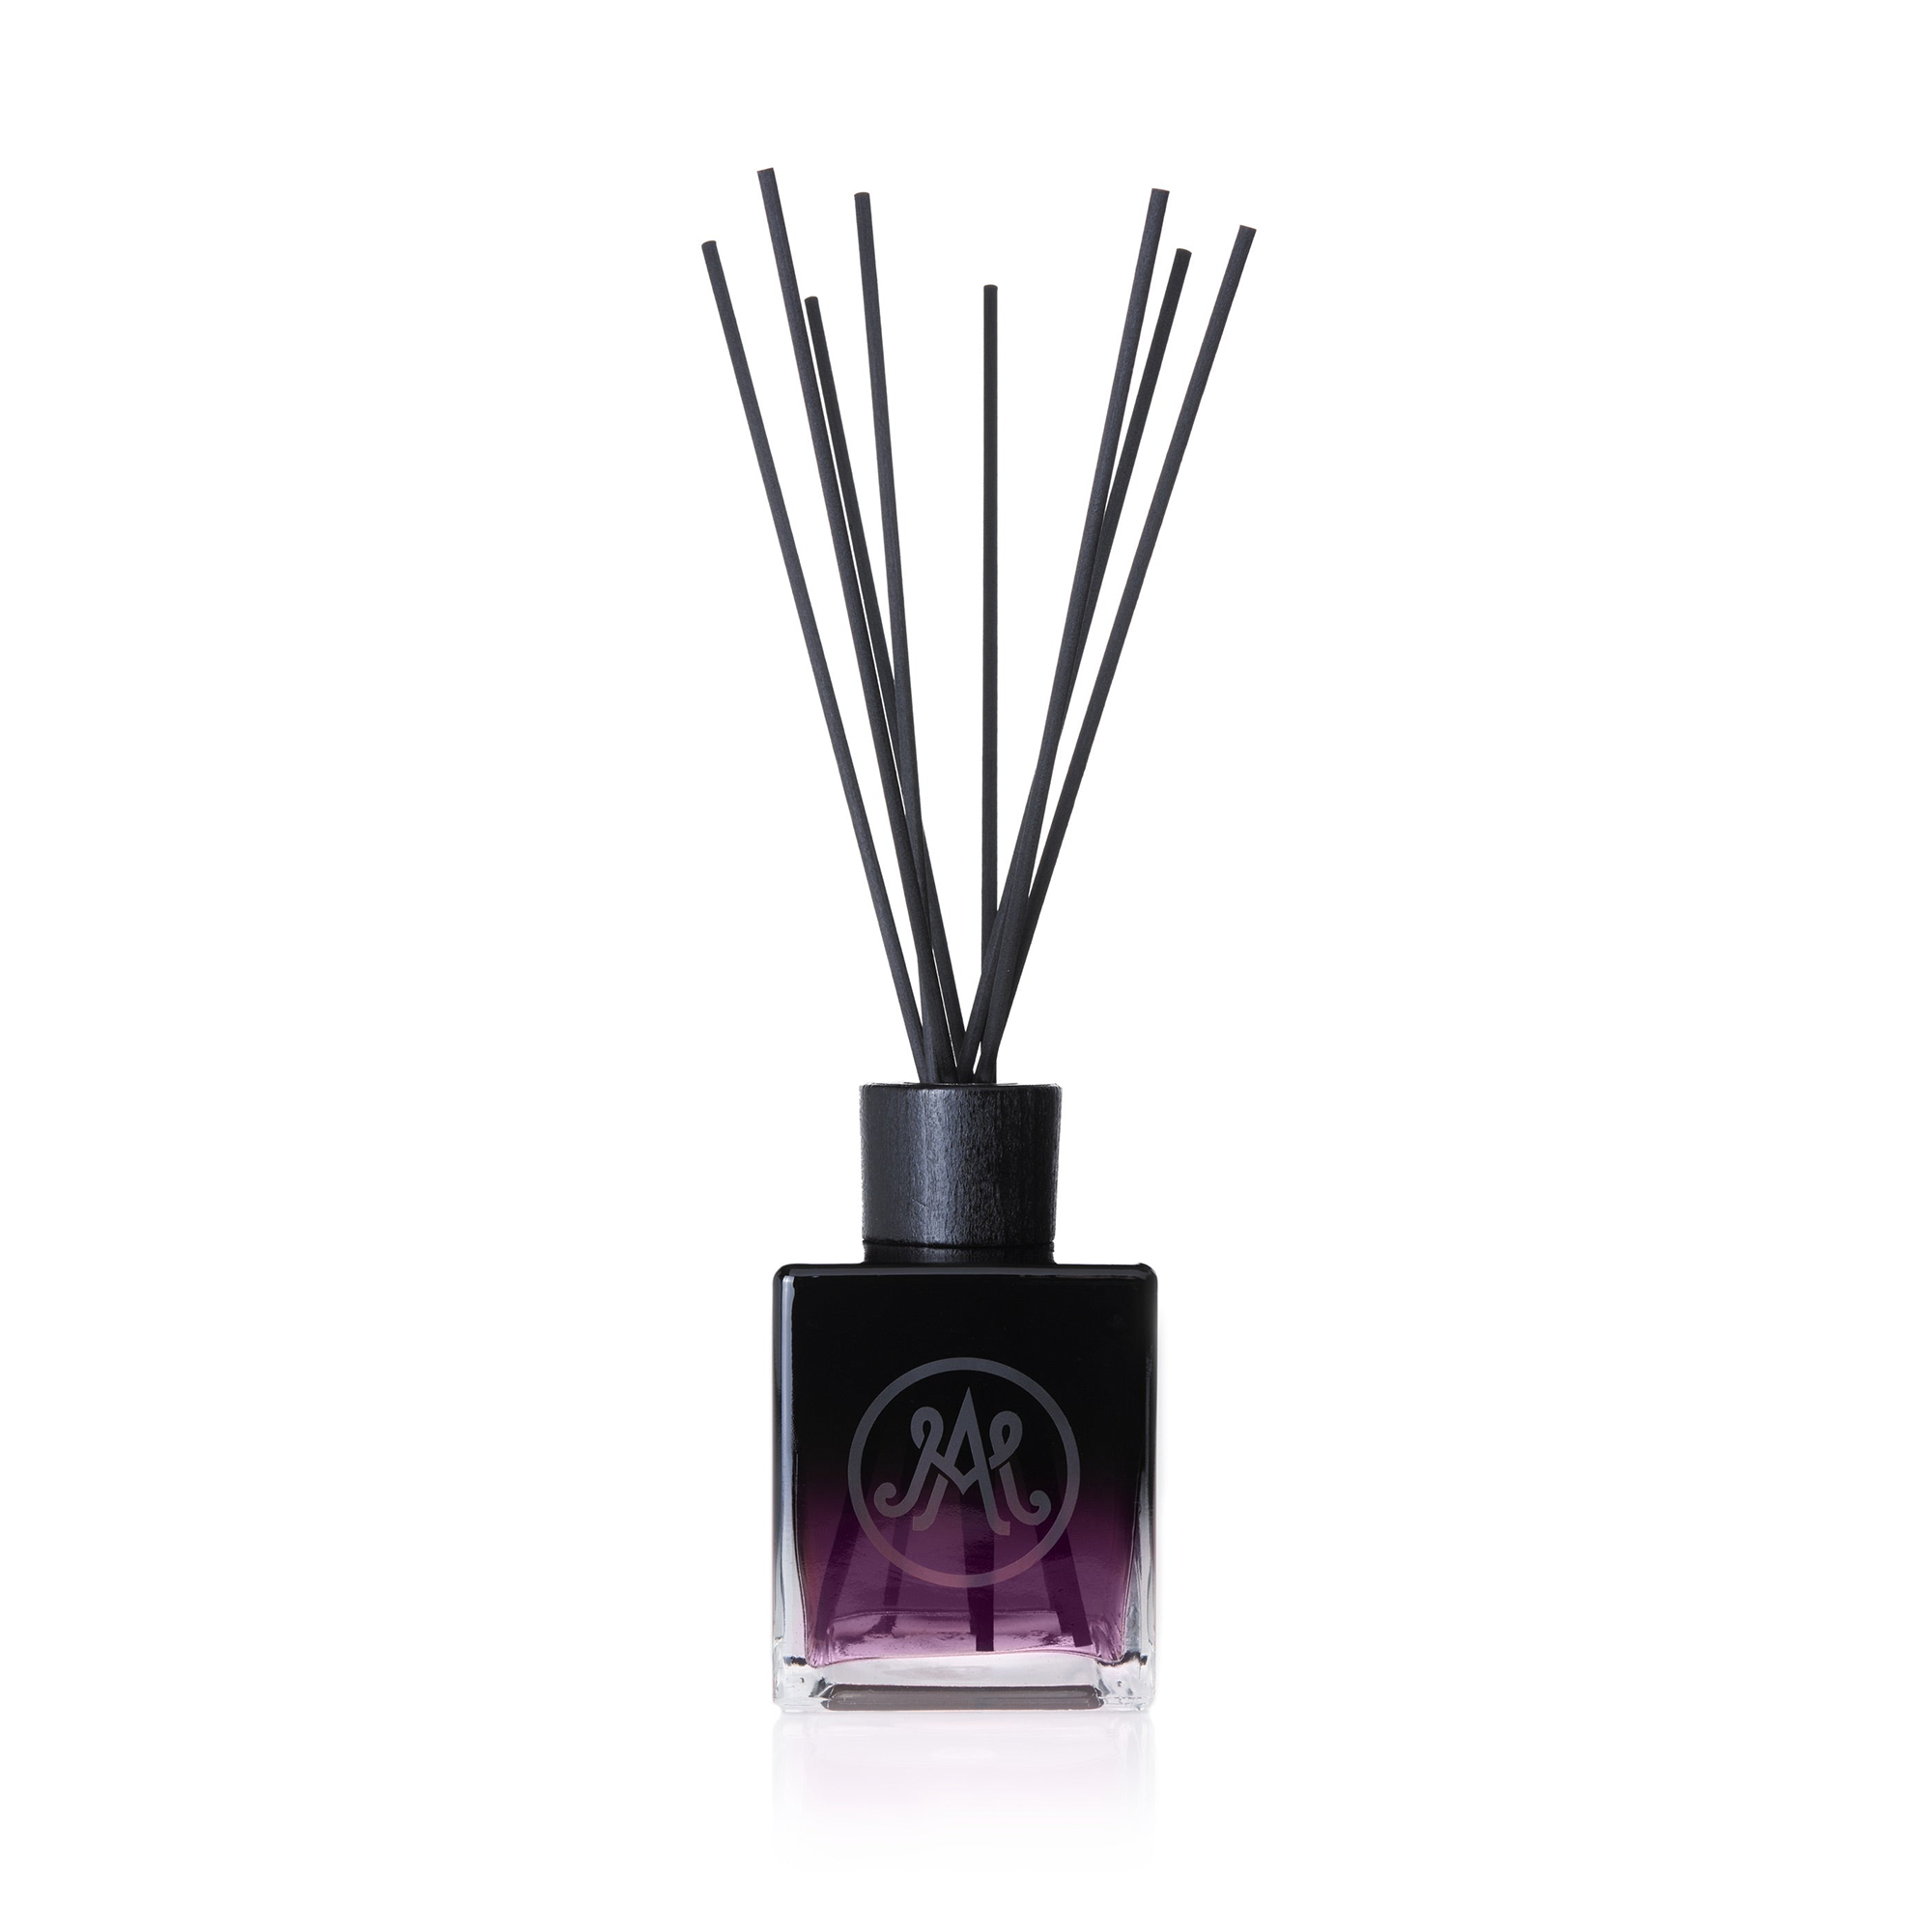 A dark purple diffuser with black reeds is displayed, featuring a sleek black cap and an elegant monogram logo on the front of the bottle. Infused with notes of blackcurrant and raspberry, creating a sweet, deep, and smoky scent.